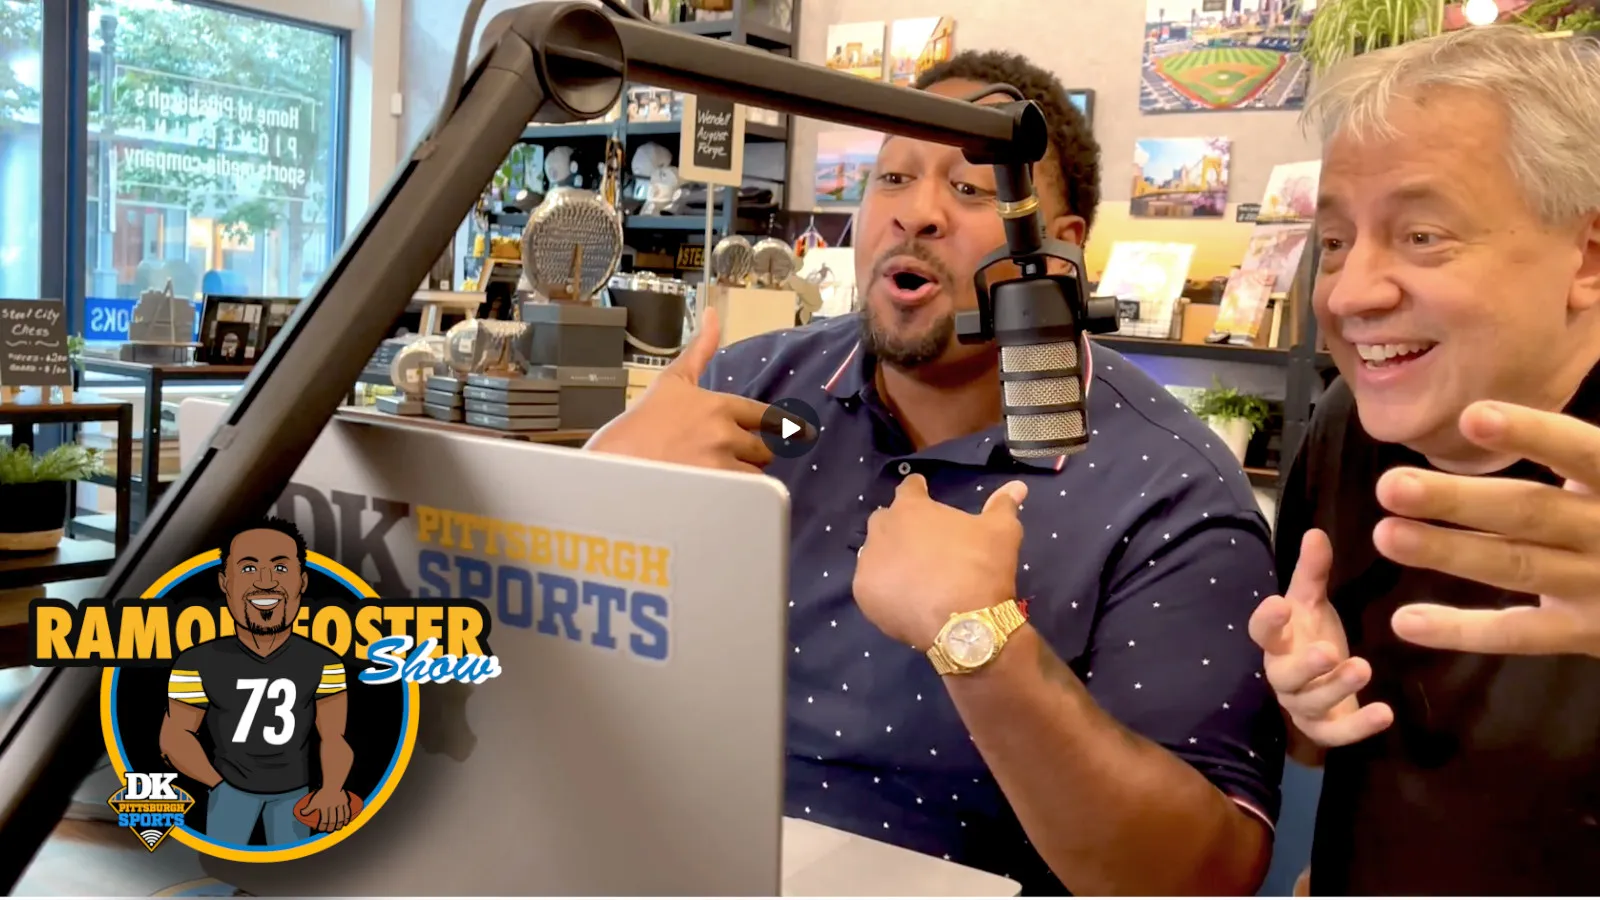 The Ramon Foster Steelers Show: Now LIVE every weekday, 4 p.m.!